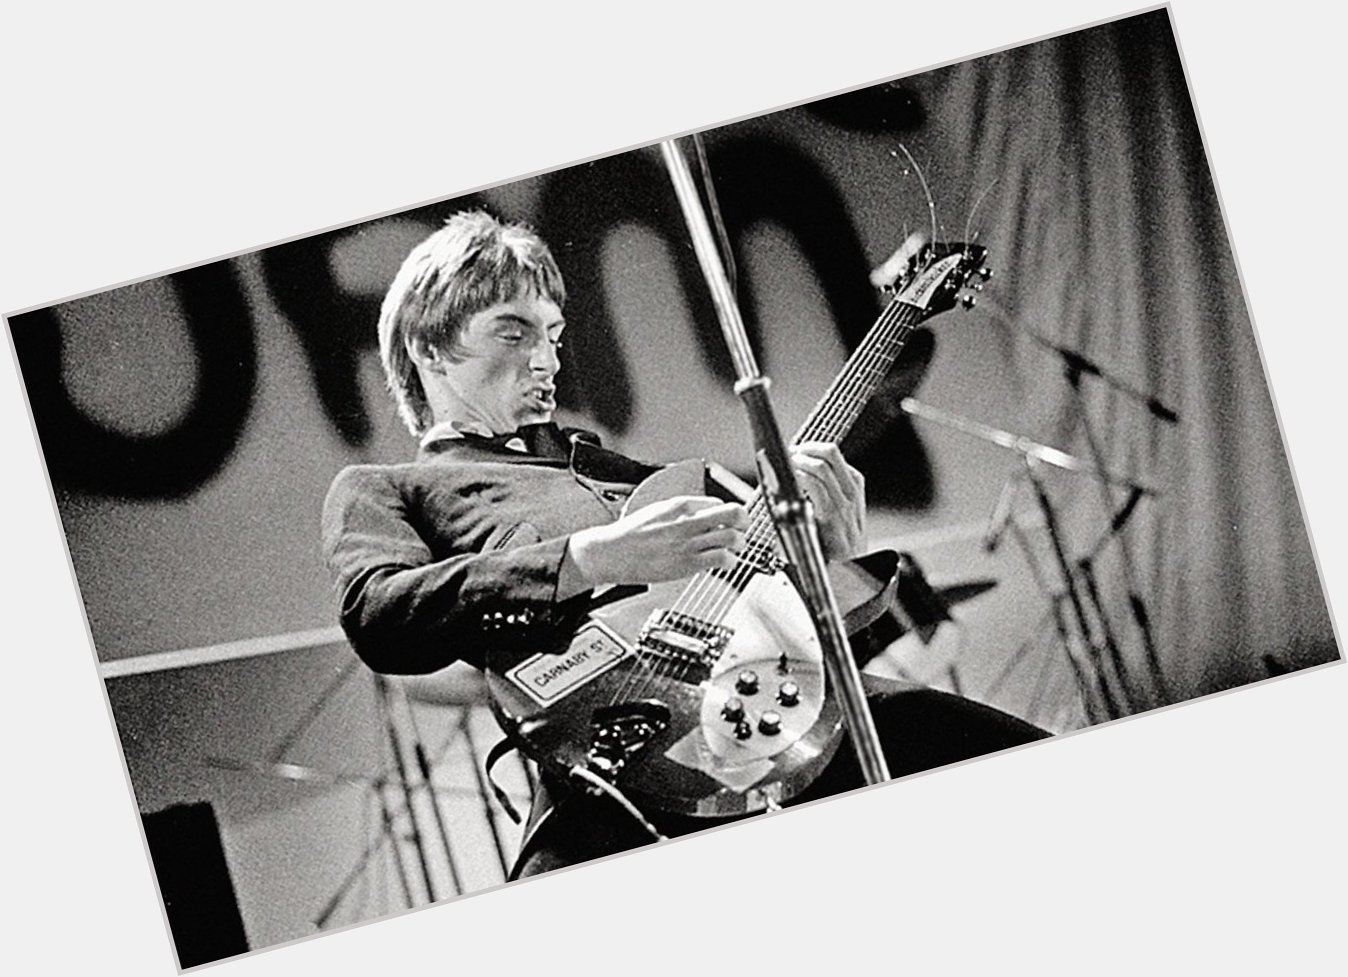 Sending big Happy 65th birthday wishes to one of my favorites, Paul Weller.  